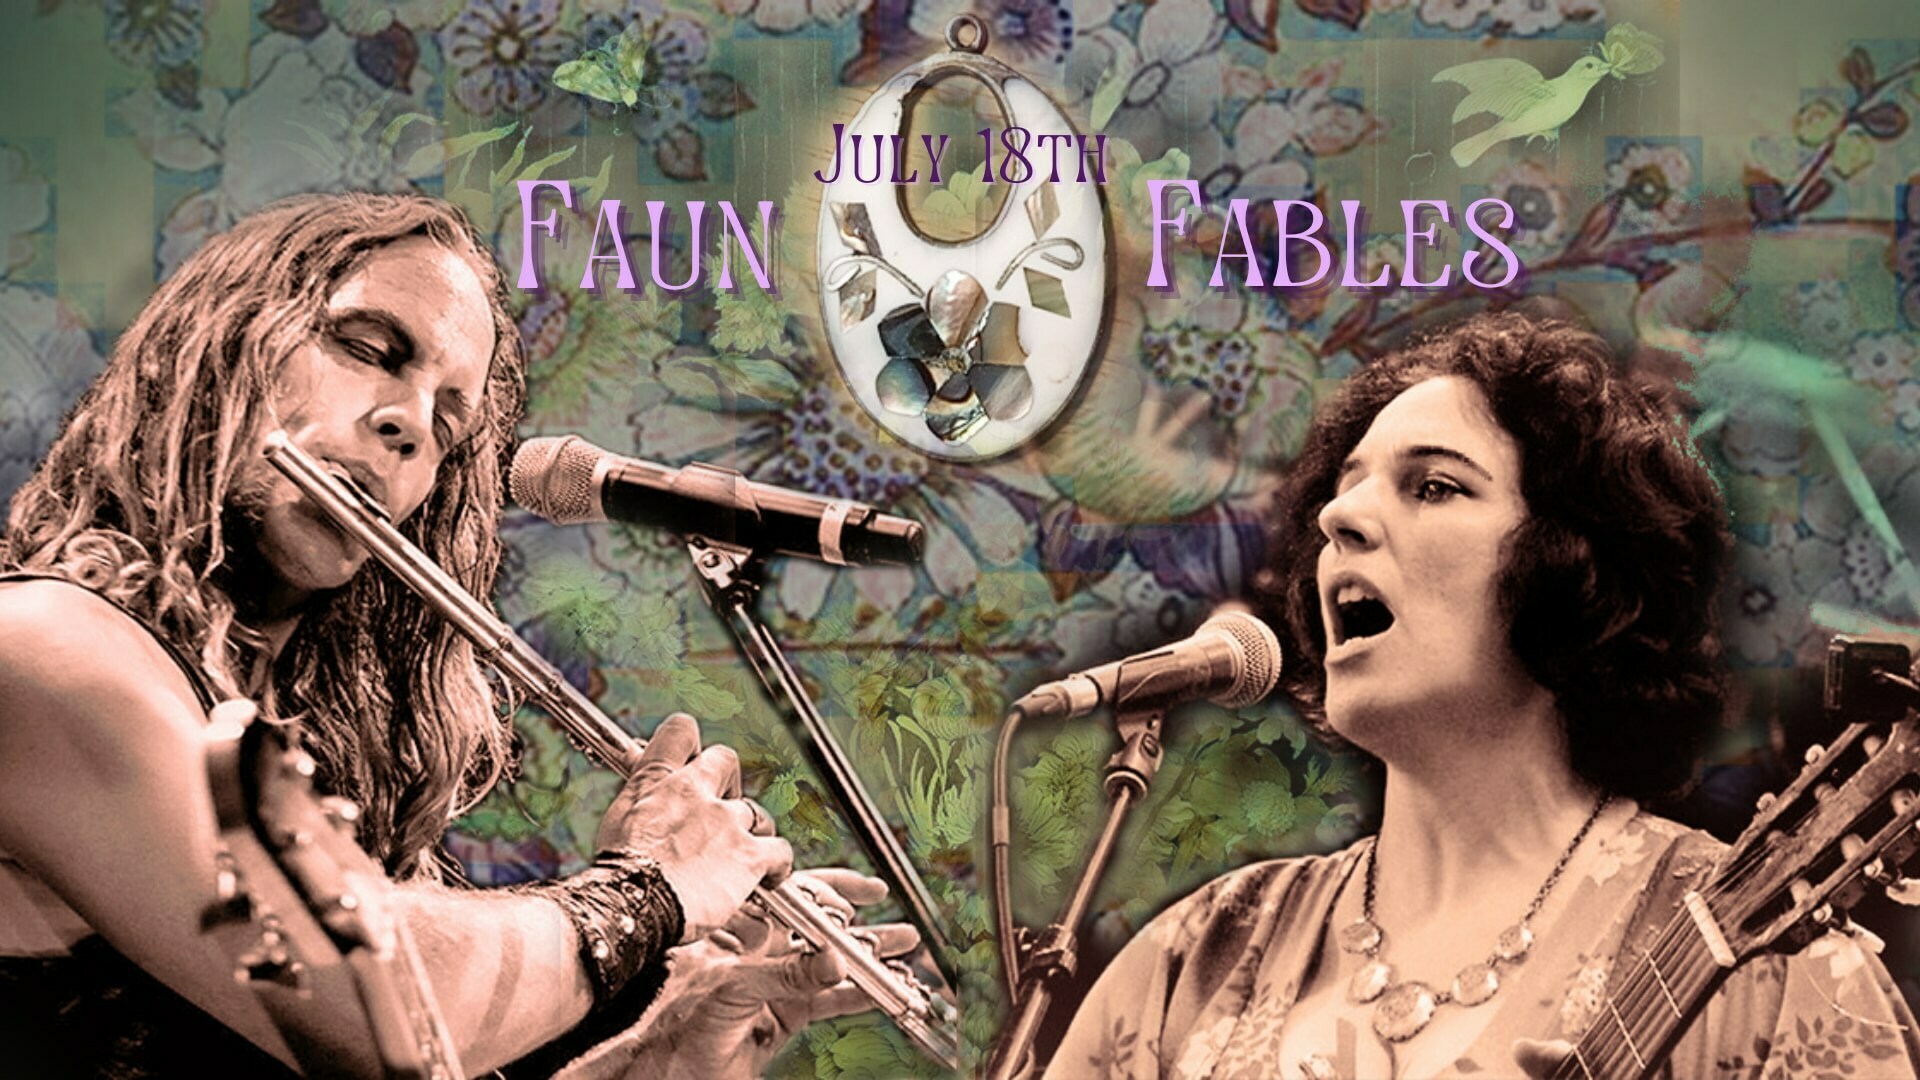 Faun Fables and Thee Corvids - July 18th, Boise, Idaho, United States